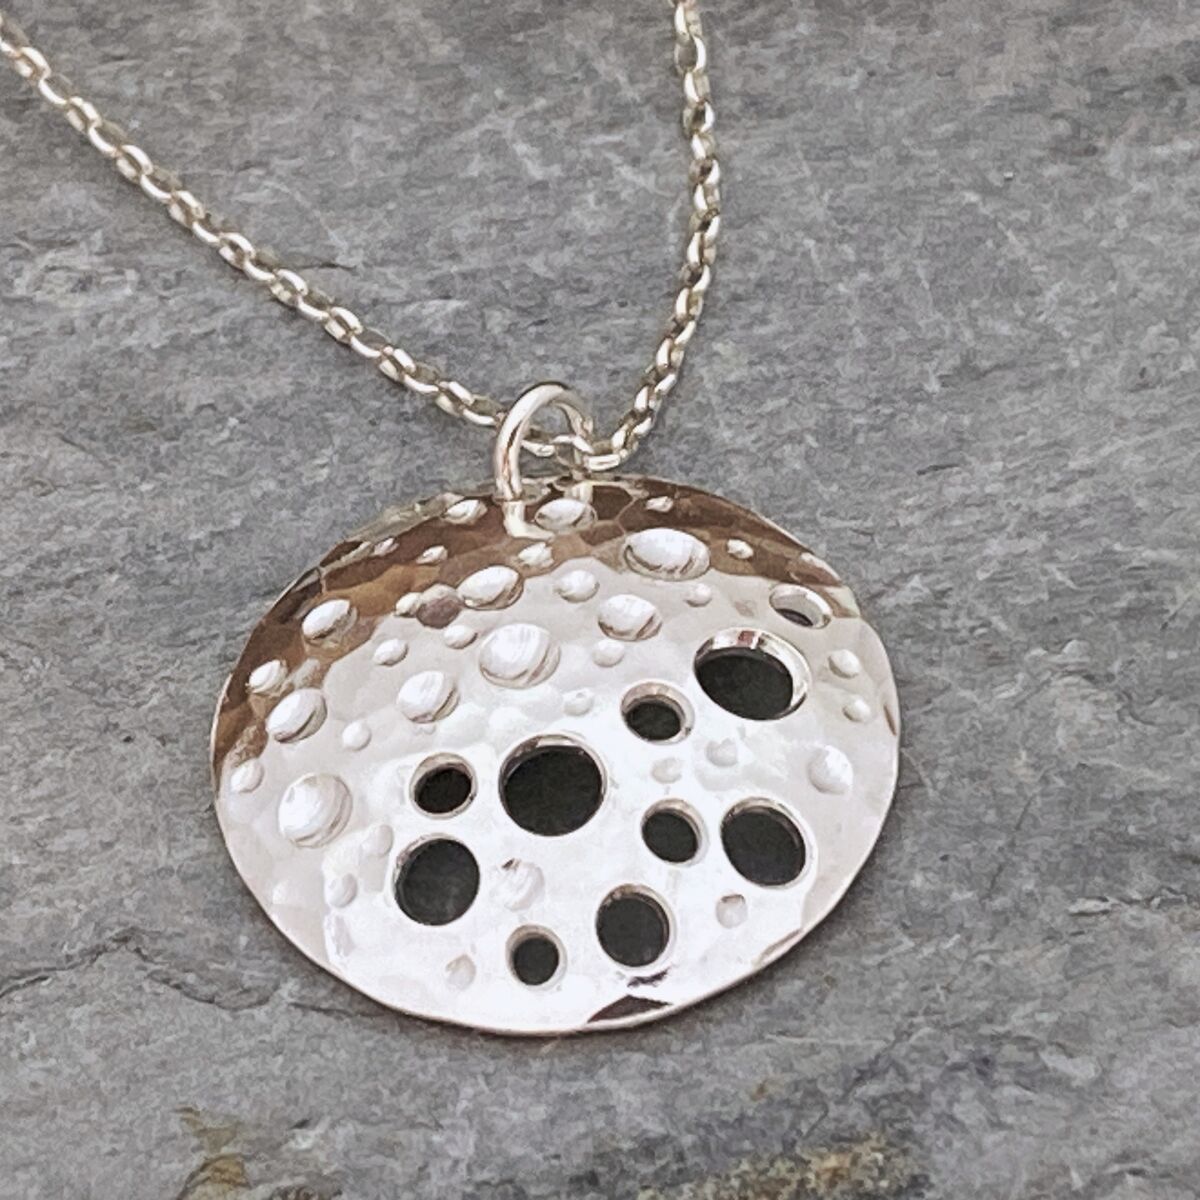 Round silver necklace 4